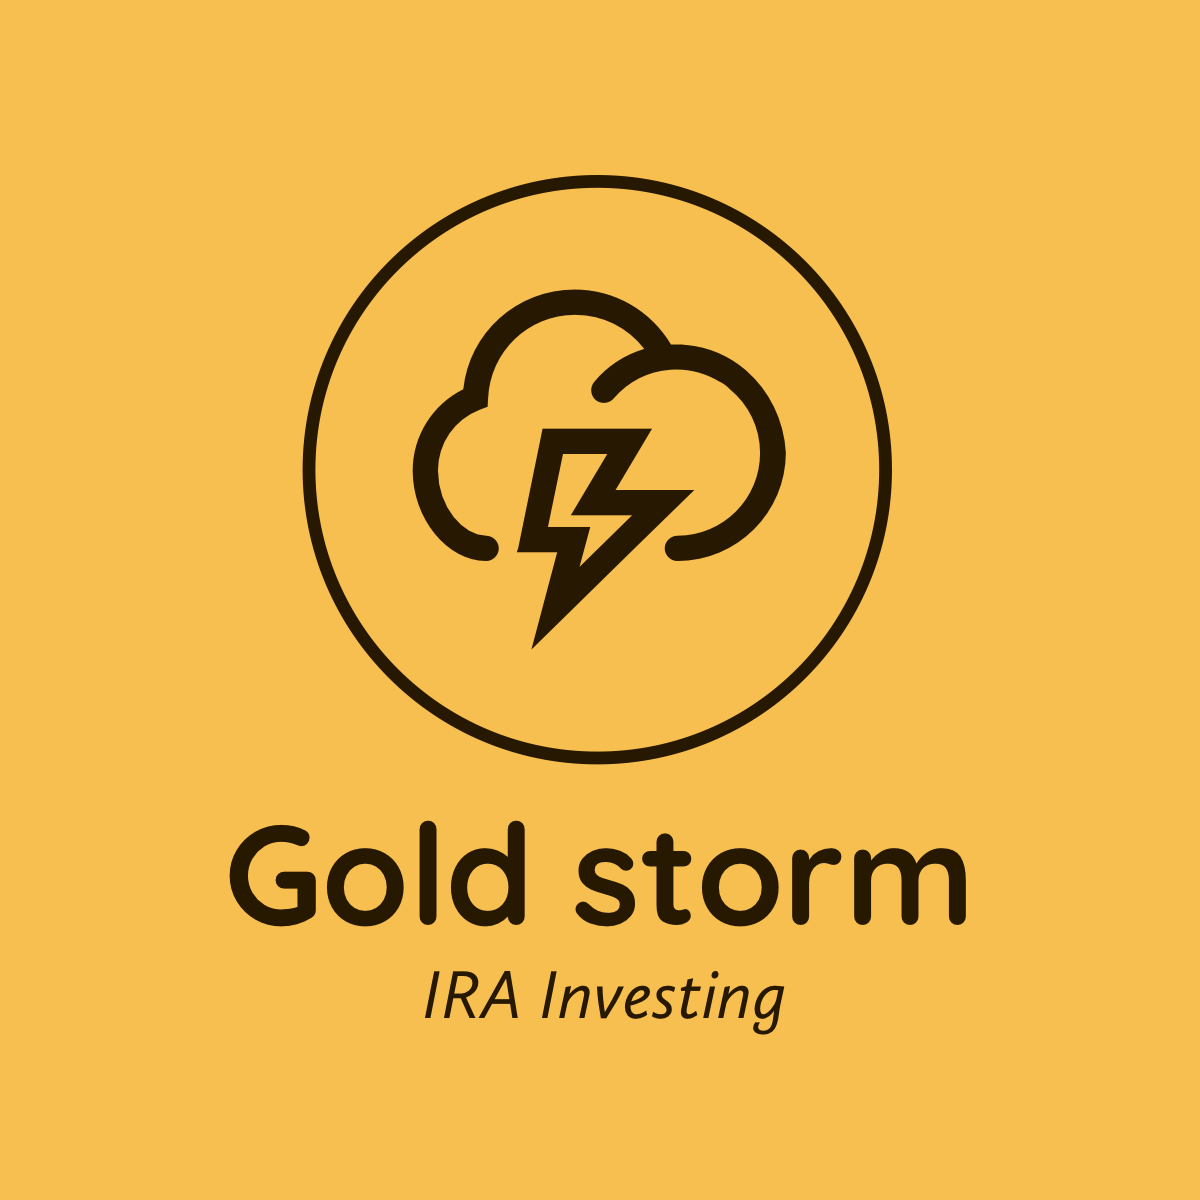 Gold Storm IRA Investing | Guide for Gold IRA Investment